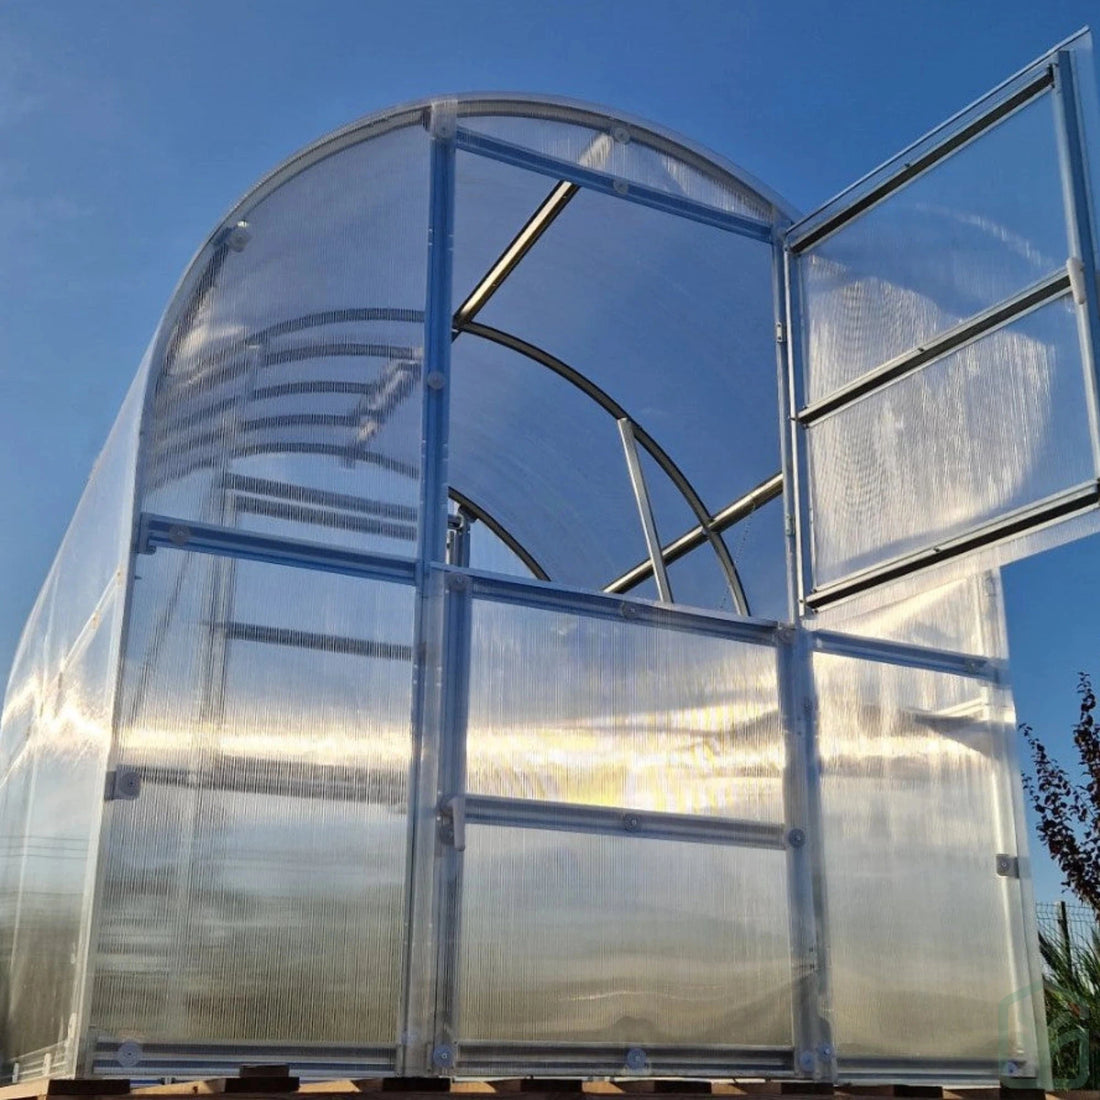 Mini greenhouse from the front with opened window